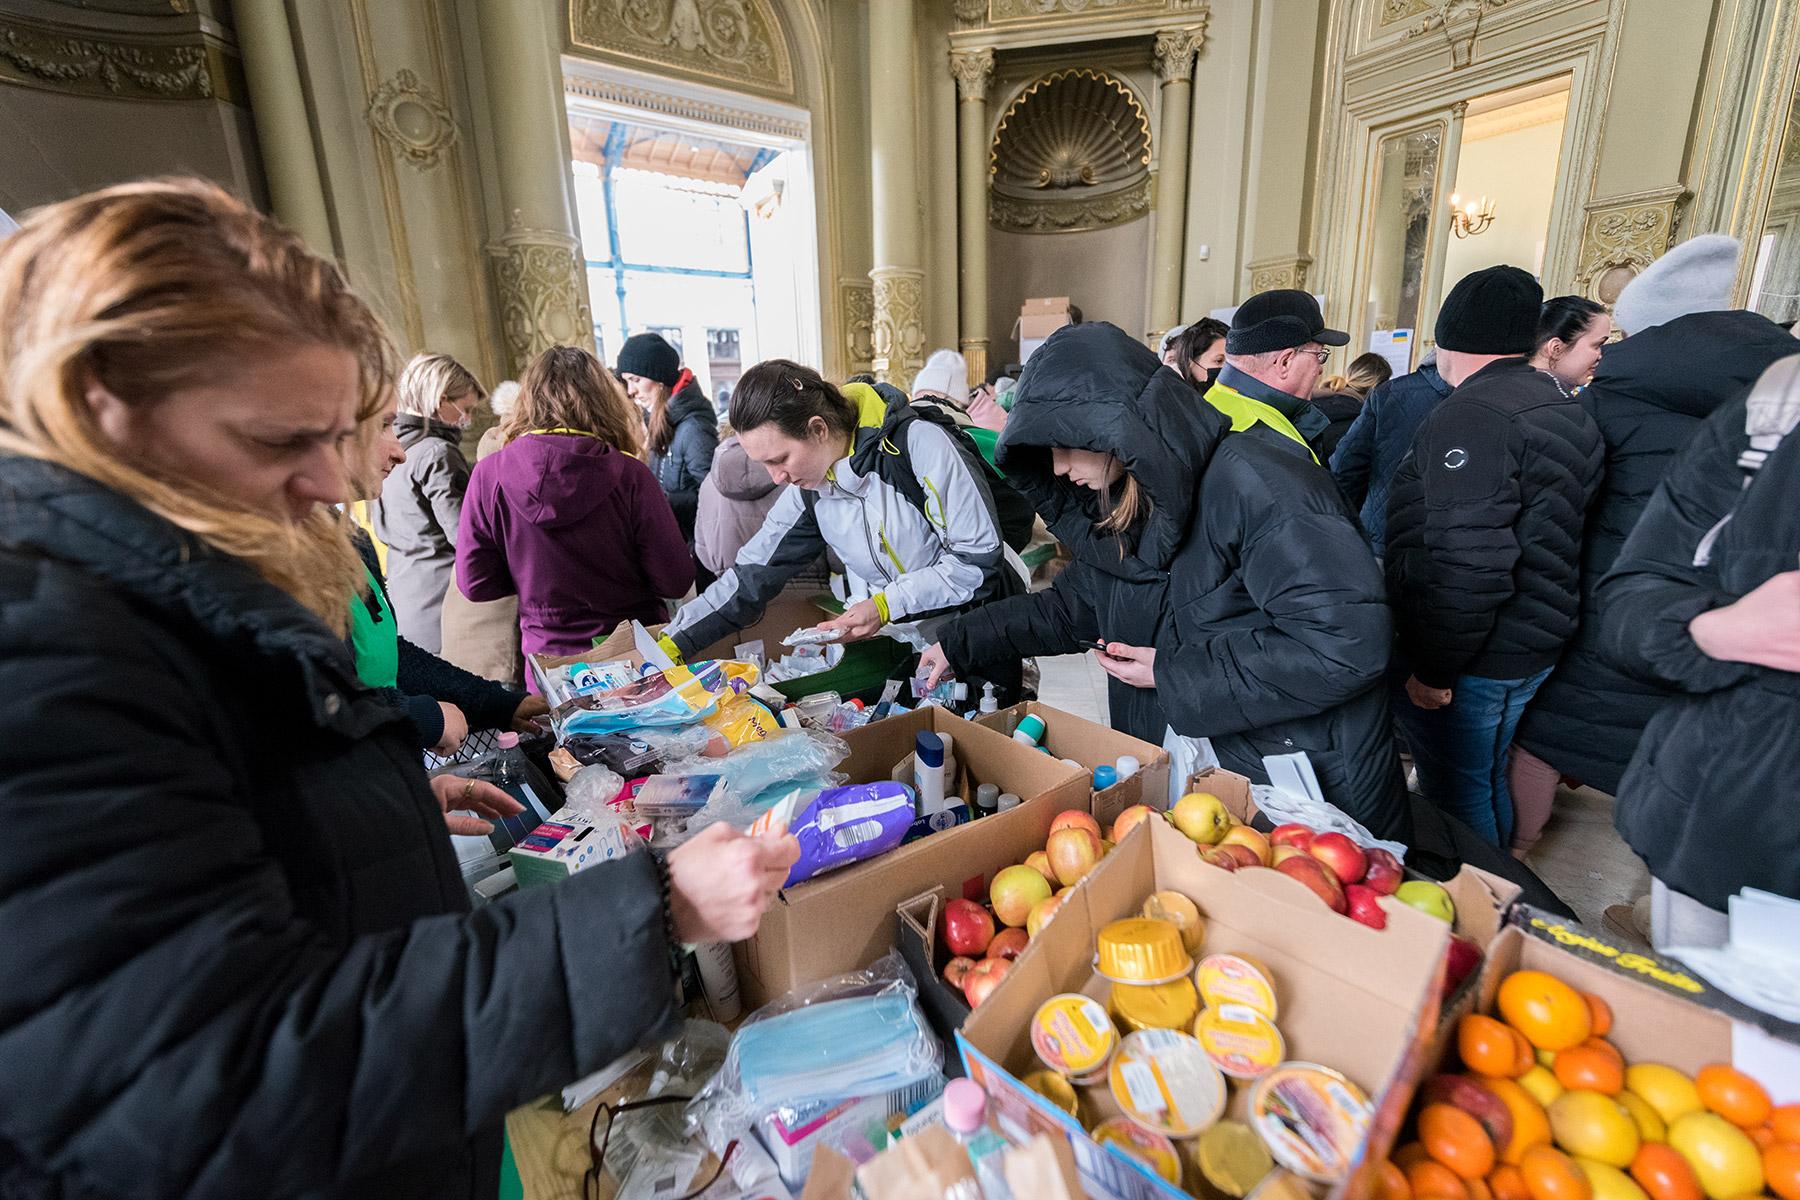 Since the Russian invasion of Ukraine began on 24 February 2022, the Nyugati train station in Budapest has become a central entry point for refugees arriving by train from the Ukrainian border areas in northeast Hungary. At the station, a range of civil society organisations and other volunteers offer support to incoming refugees. Photo: LWF/Albin Hillert